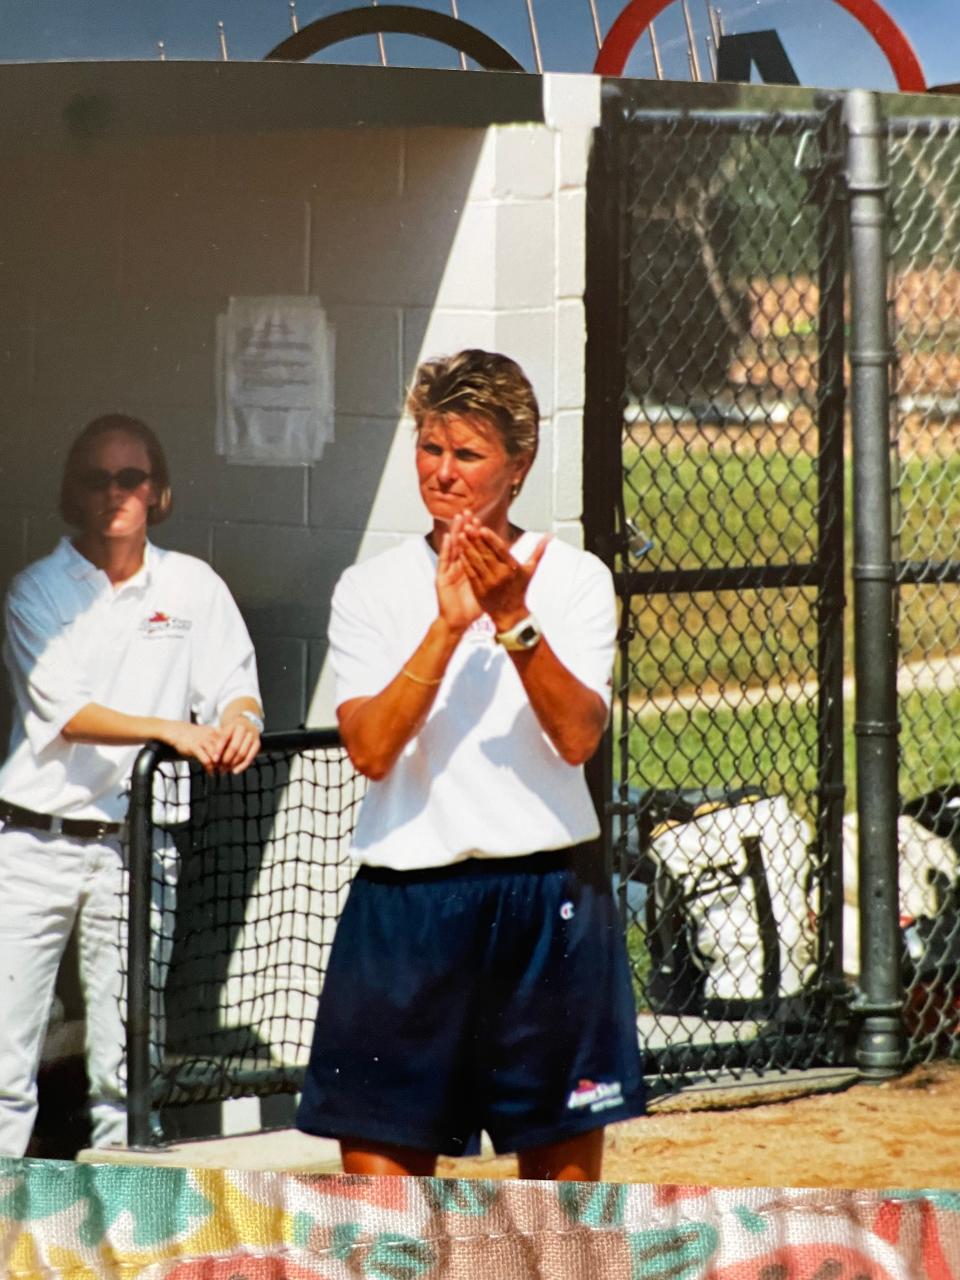 After helping lead Allendale High School to a state championship in 1977 and Texas Woman's University to a national championship in 1979, Ruth Crowe made a 20-year career of coaching collegiate softball, including a nine-year stint at Iowa State University.